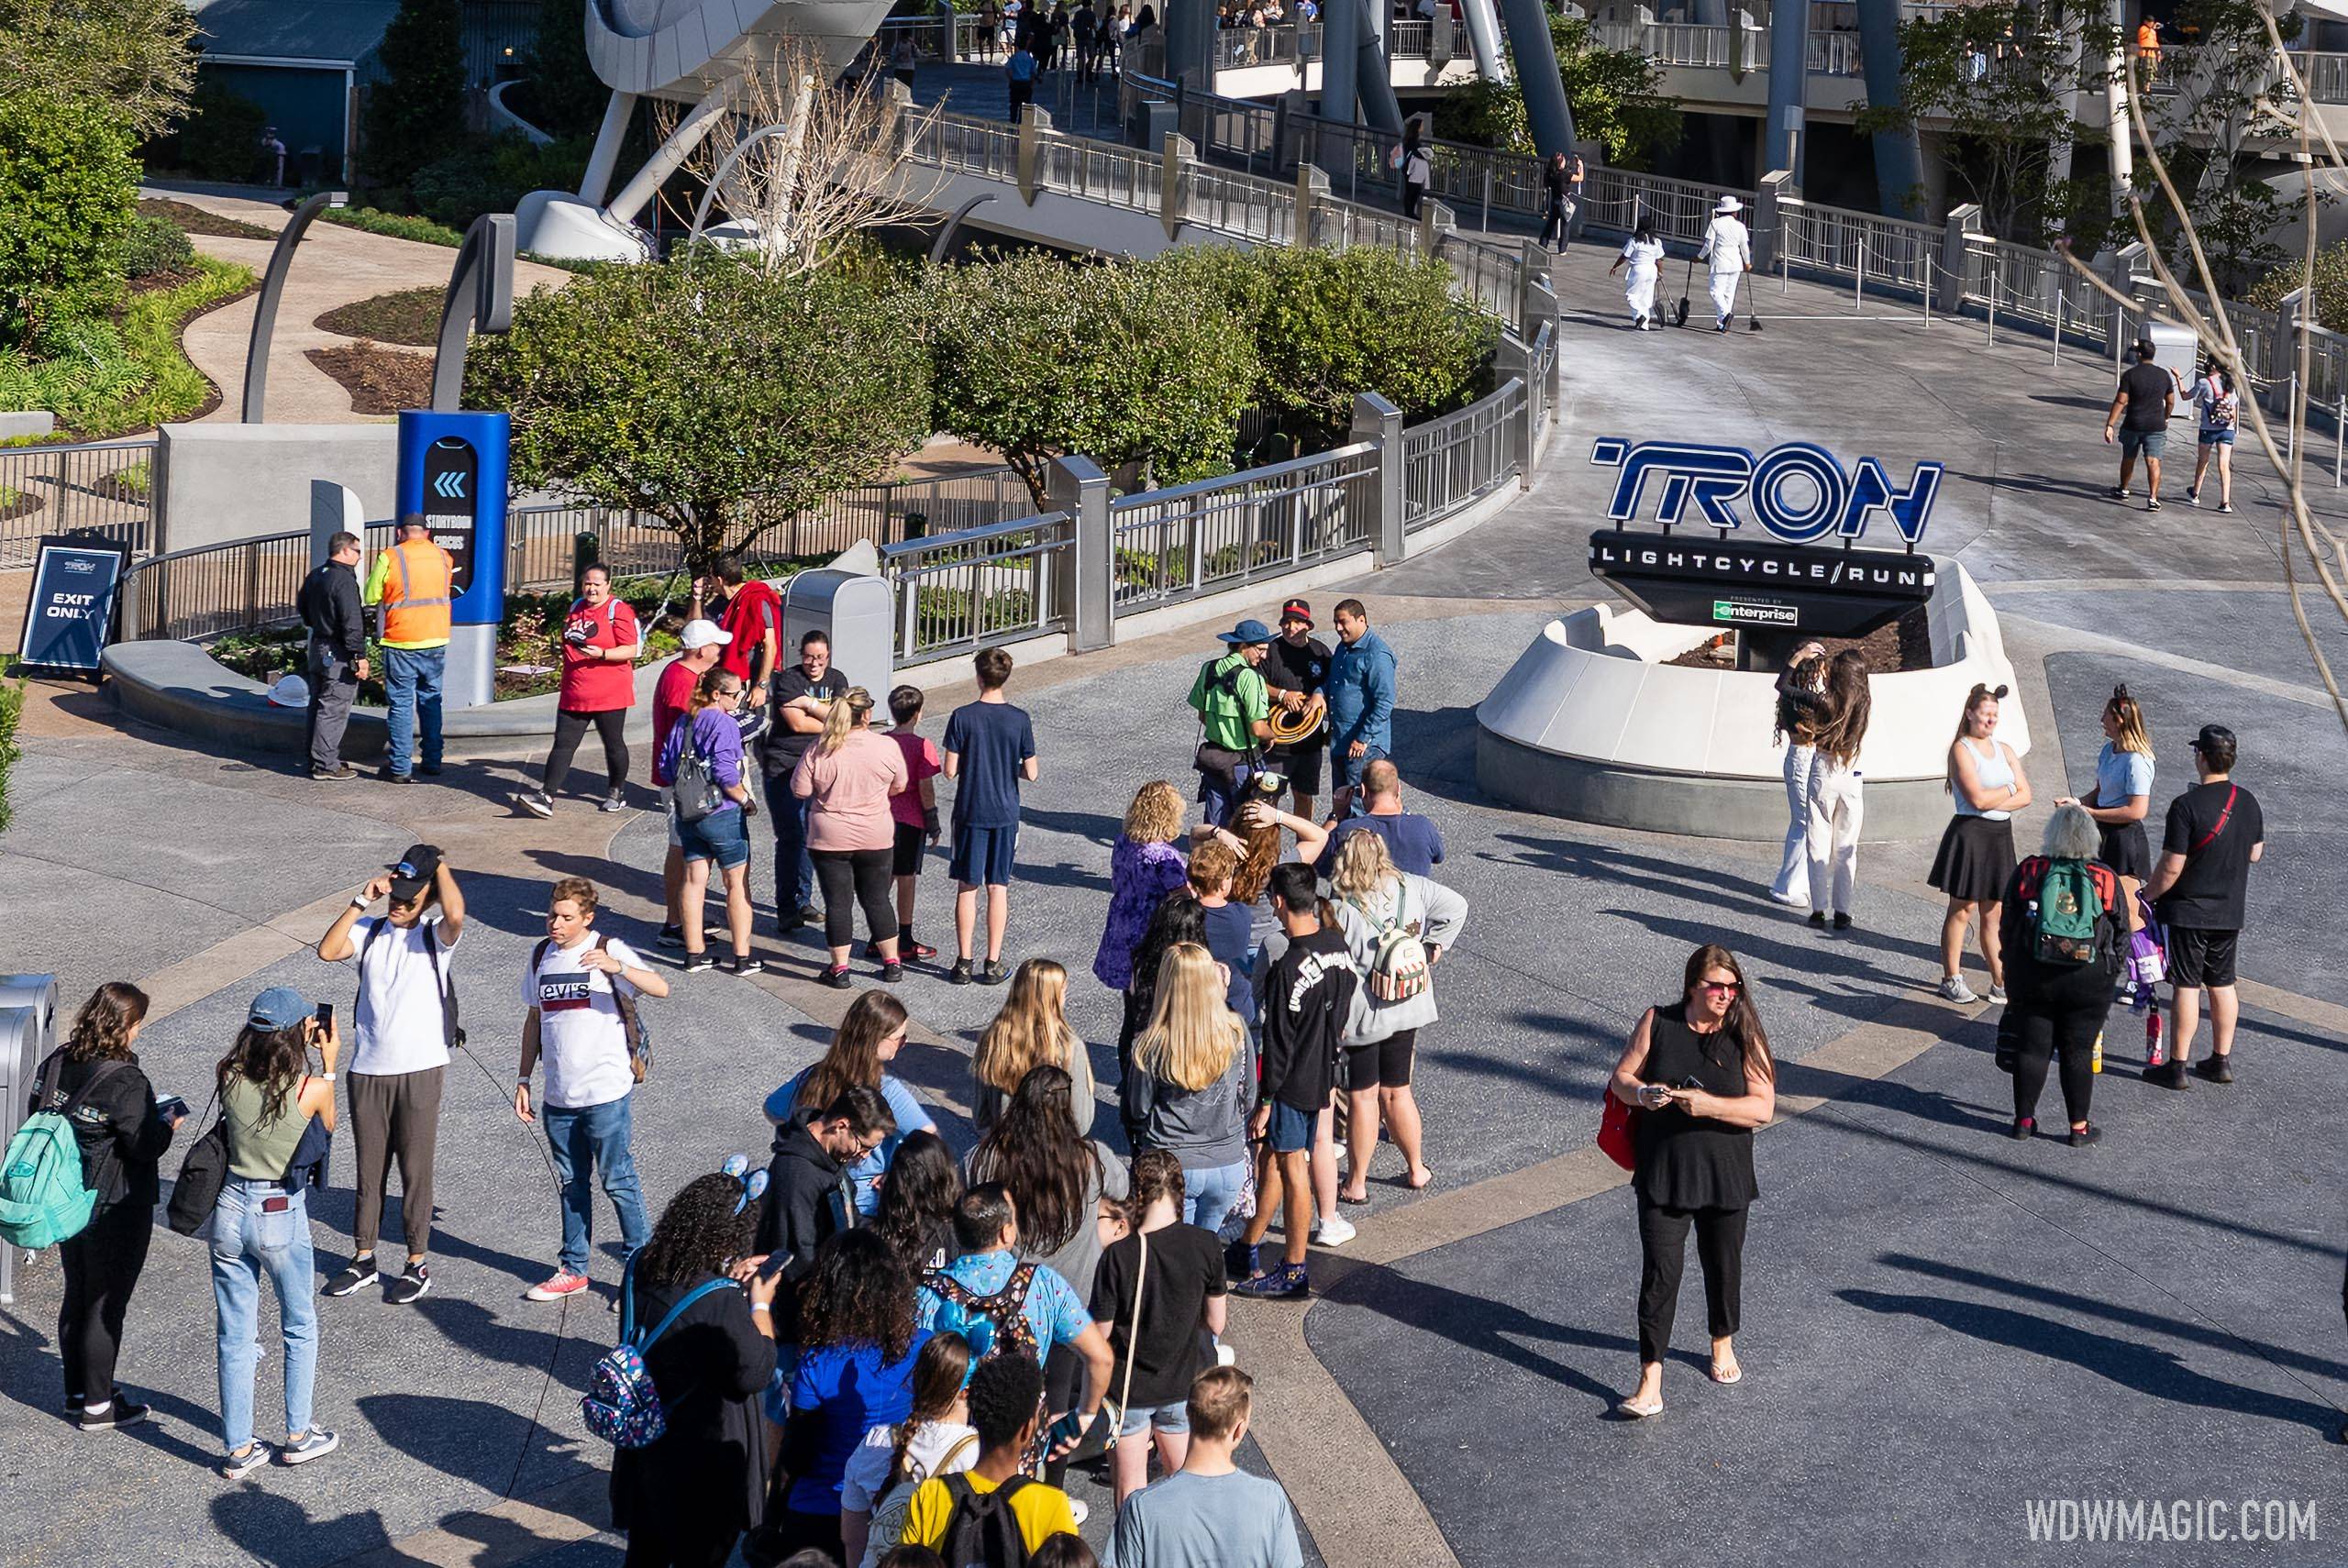 TRON Lightcycle Run Cast Member previews are in full swing as work continues on Tomorrowland Light and Power Co. building